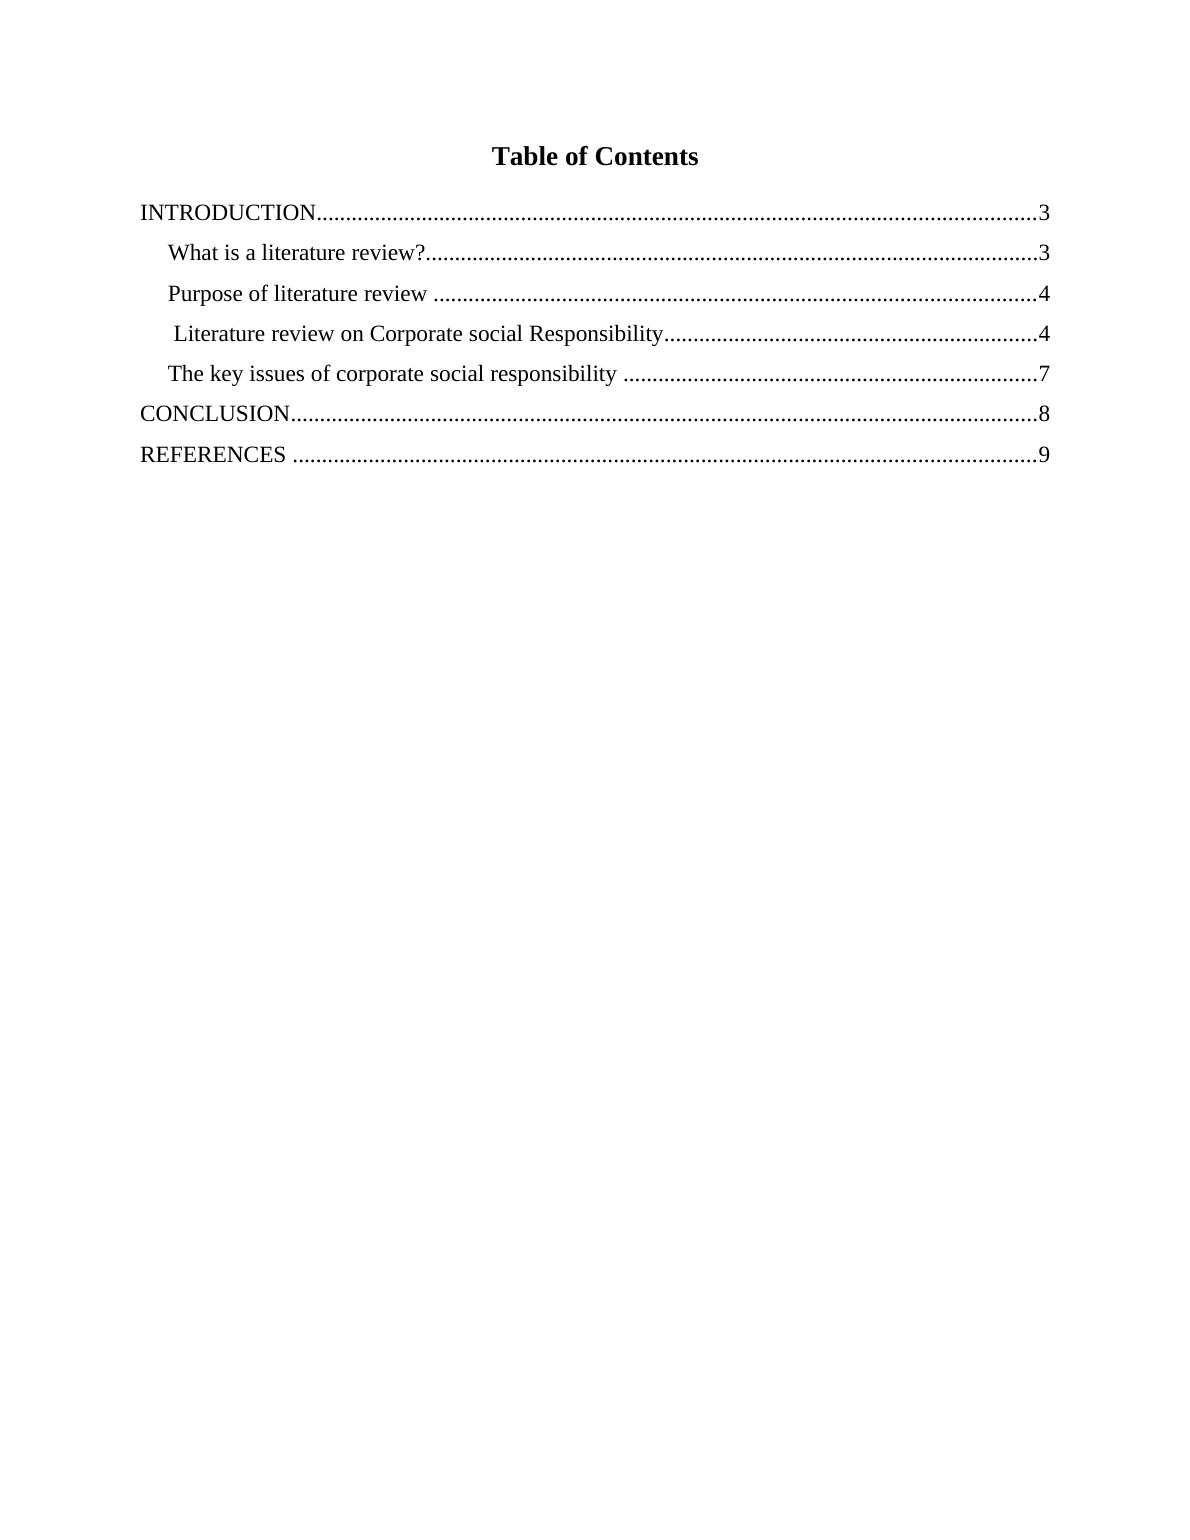 Literature Review on Corporate Social Responsibility (CSR)_2